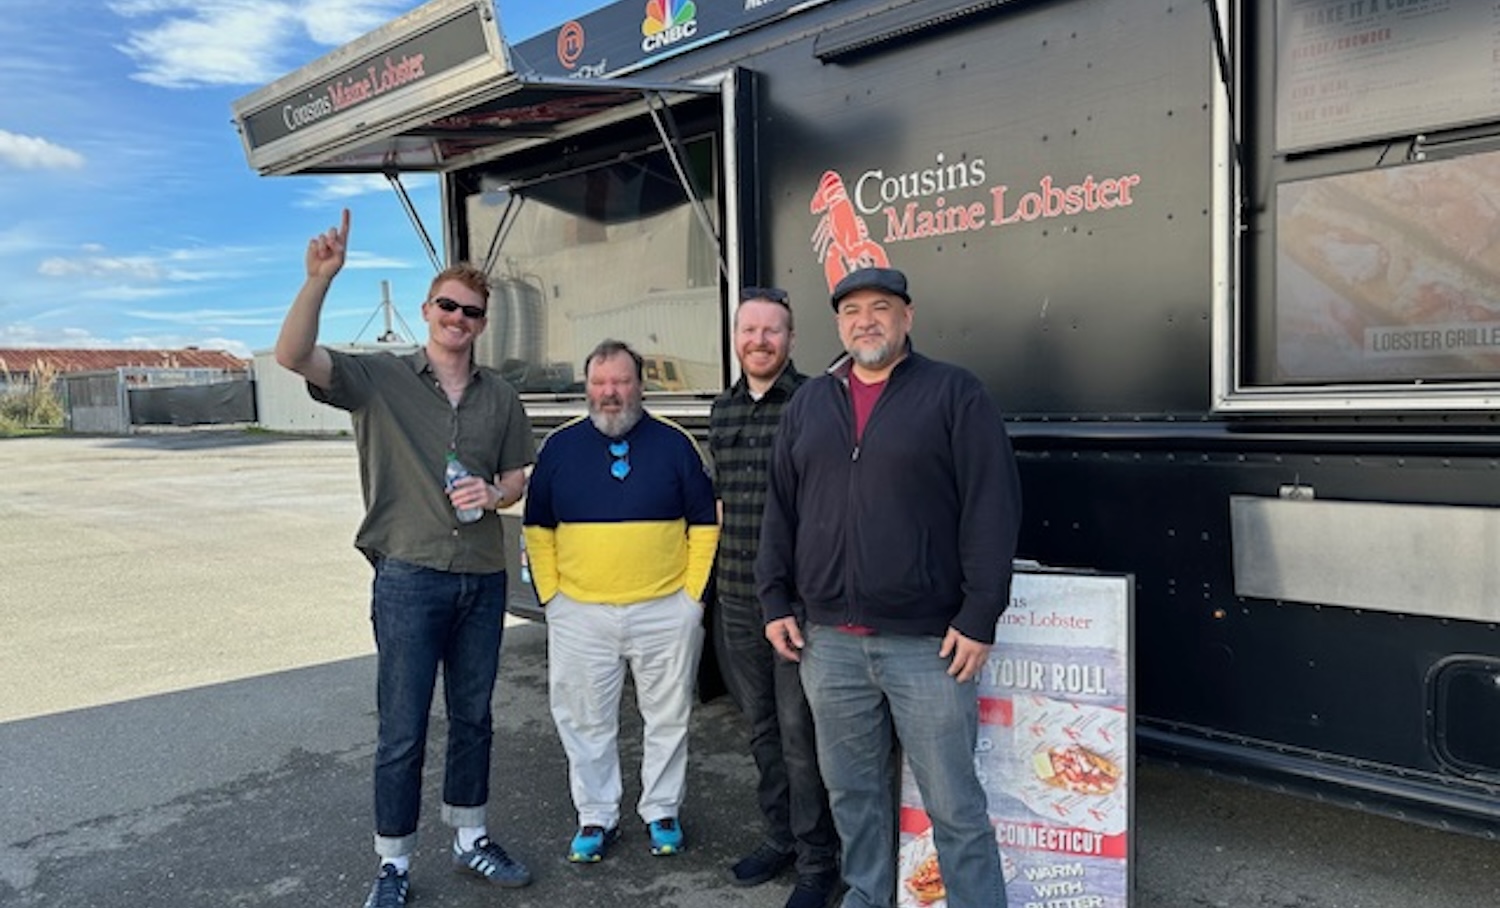 The Ray Ratto raffle winners, along with Ray Ratto and Patrick Redford, enjoying some lobster from a truck.